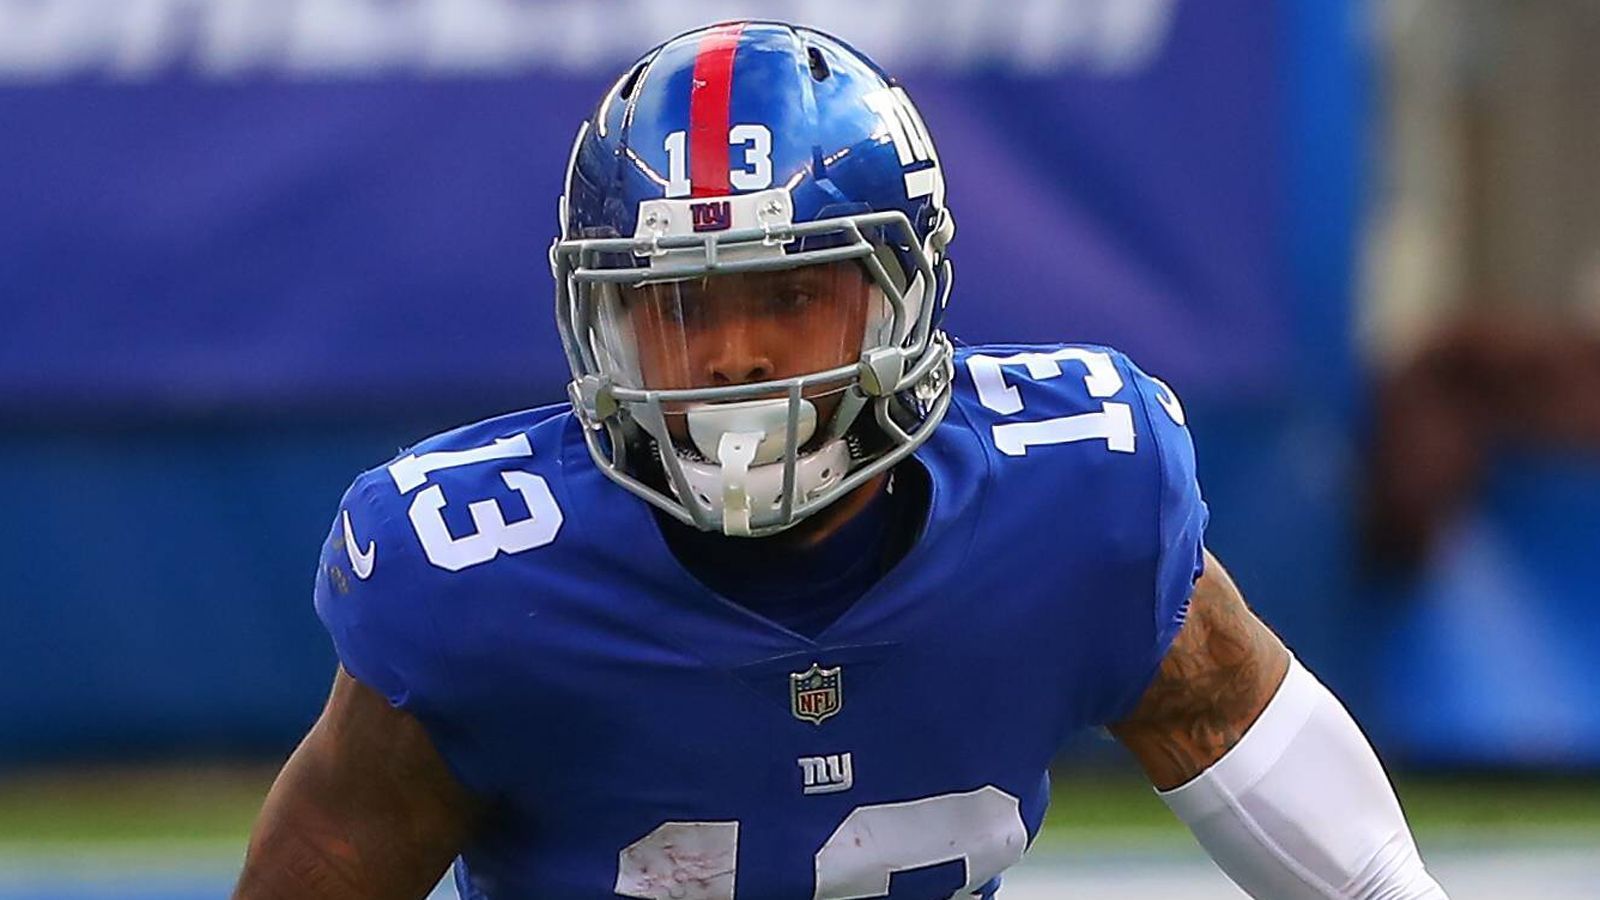 
                <strong>2. Odell Beckham Jr.</strong><br>
                Teams: New York Giants (seit 2014)Spiele: 57Big-Plays: 13
              